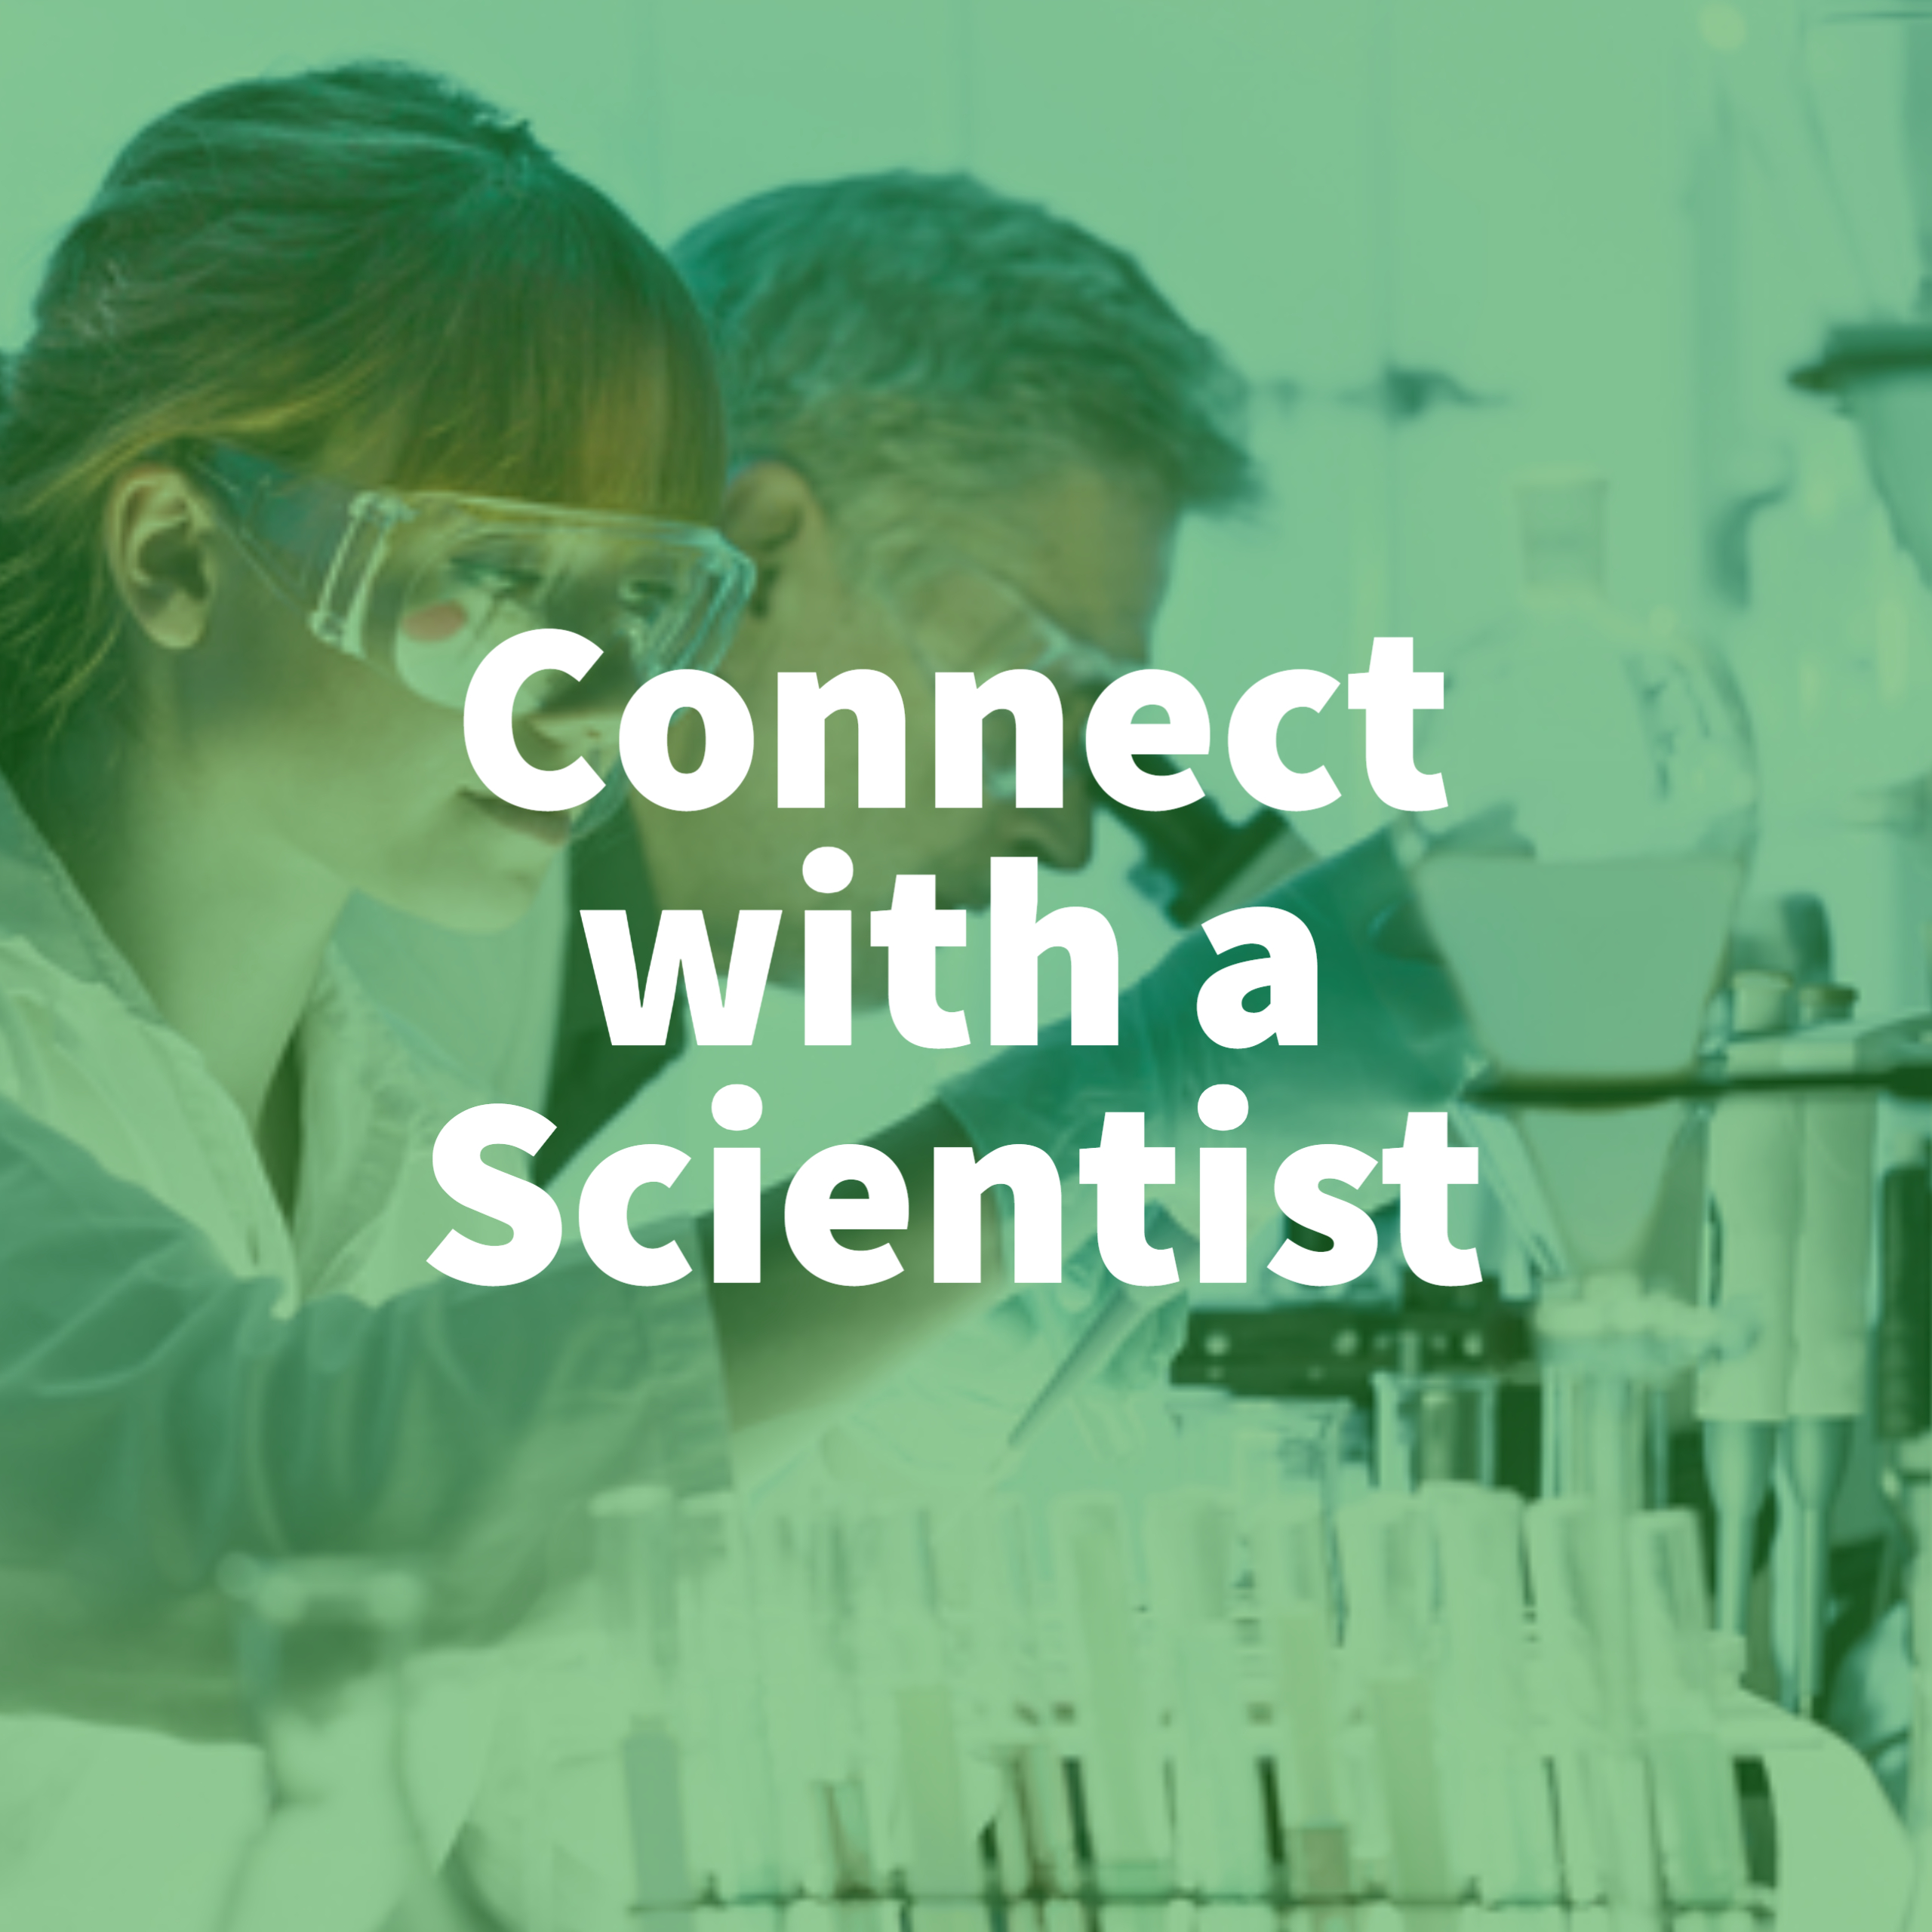 Connect with a Scientist